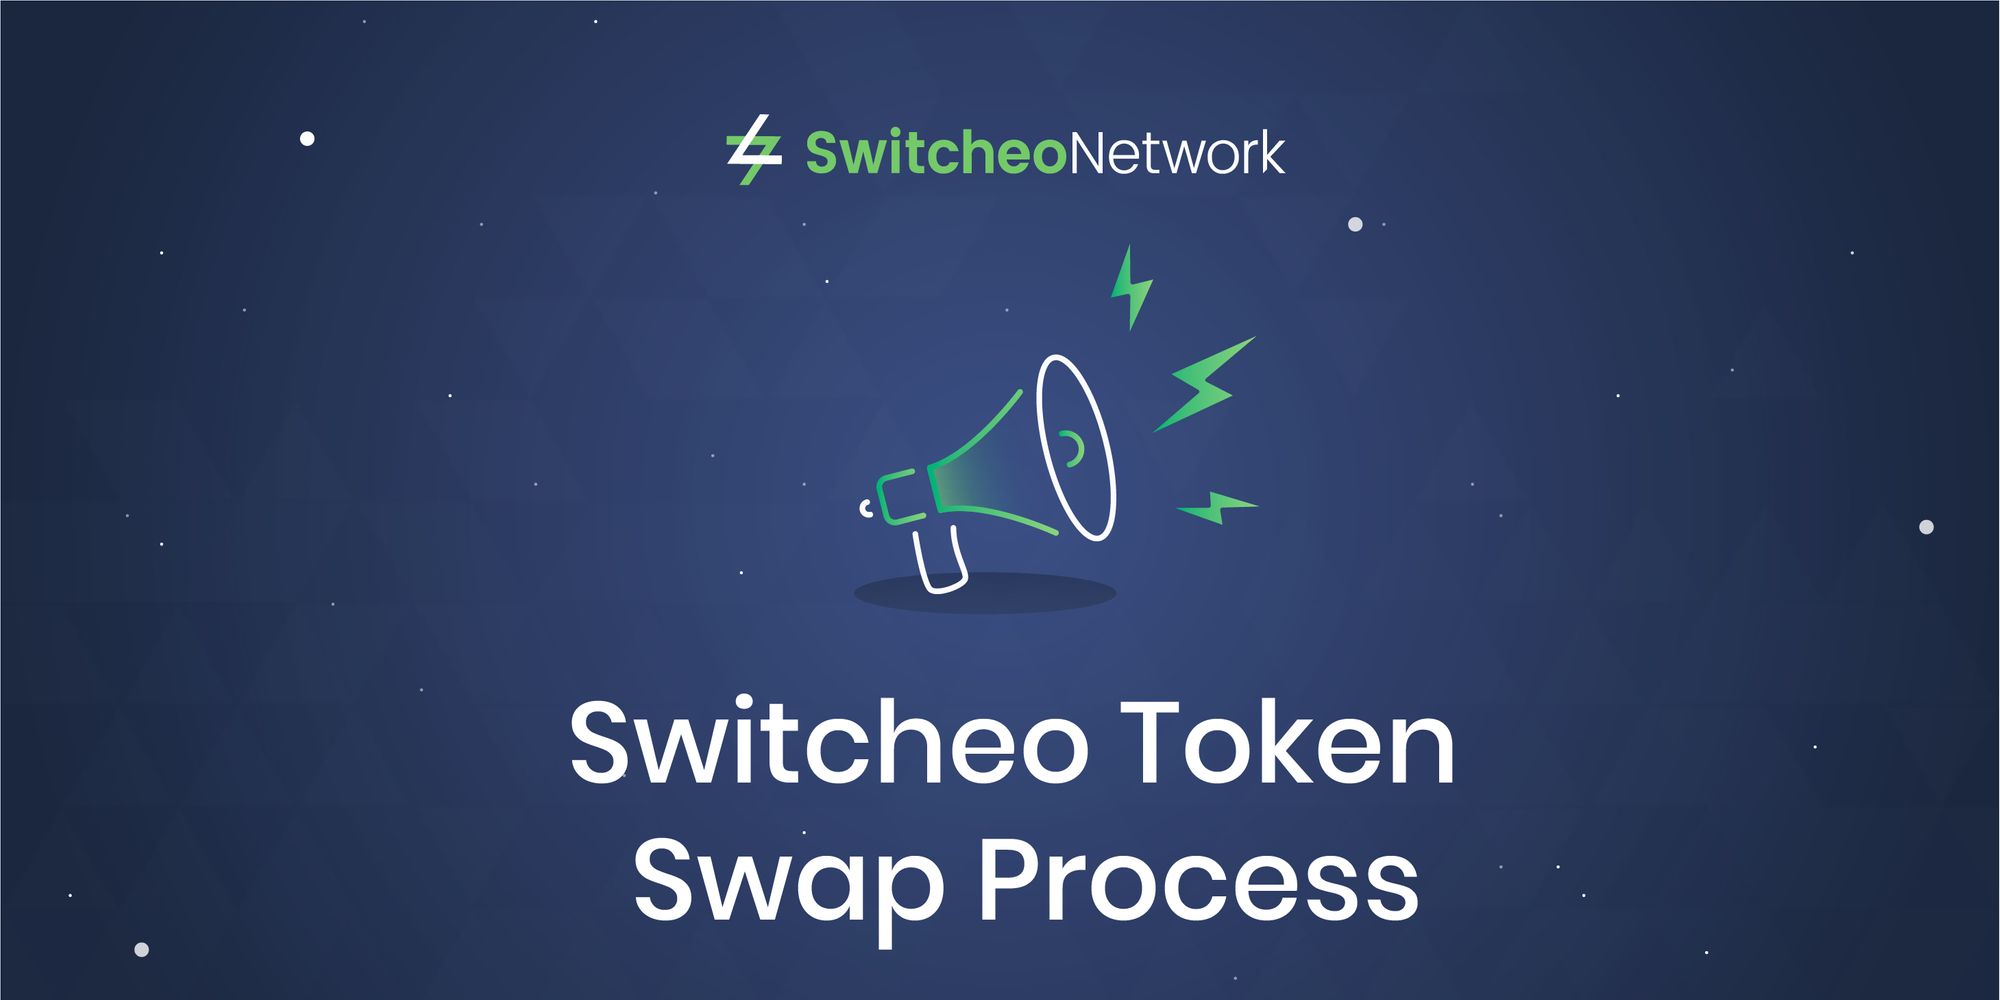 [IMPORTANT] Discontinuing Switcheo (SWH → SWTH) Token Swap Process